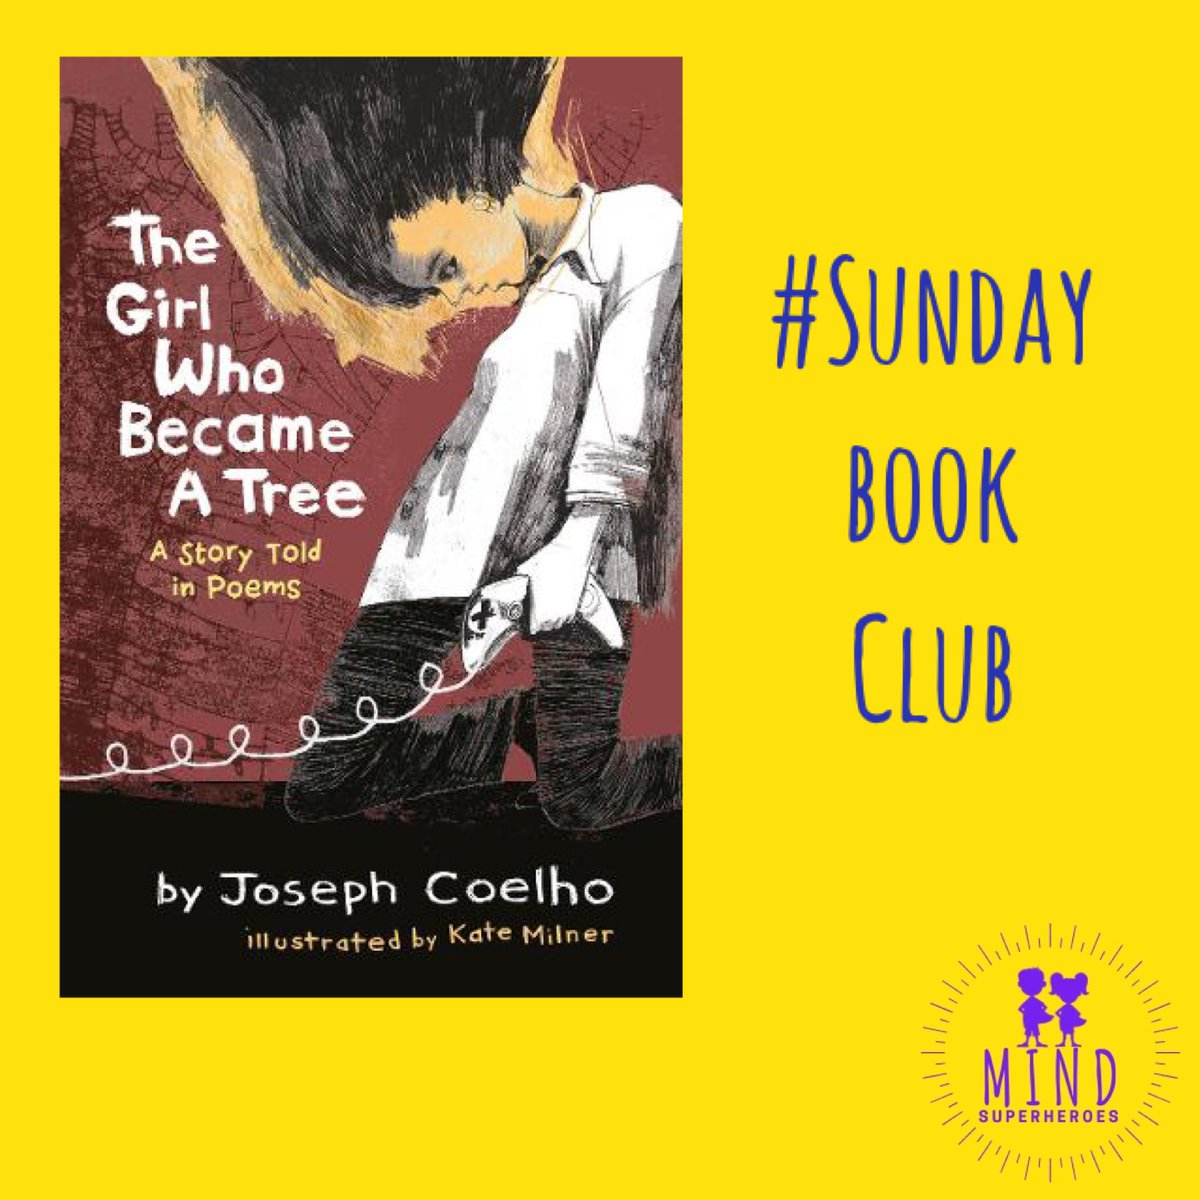 #TheGirlWhoBecameATree @josephcoelhoauthor @abagforkatie

This powerful novel, told in verse, is a captivating exploration of grief & renewal. Daphne seeks escape from her grief at the loss of her father. A skilfully-told tale for readers aged 12+
#SundayBookClub #MindSuperheroes